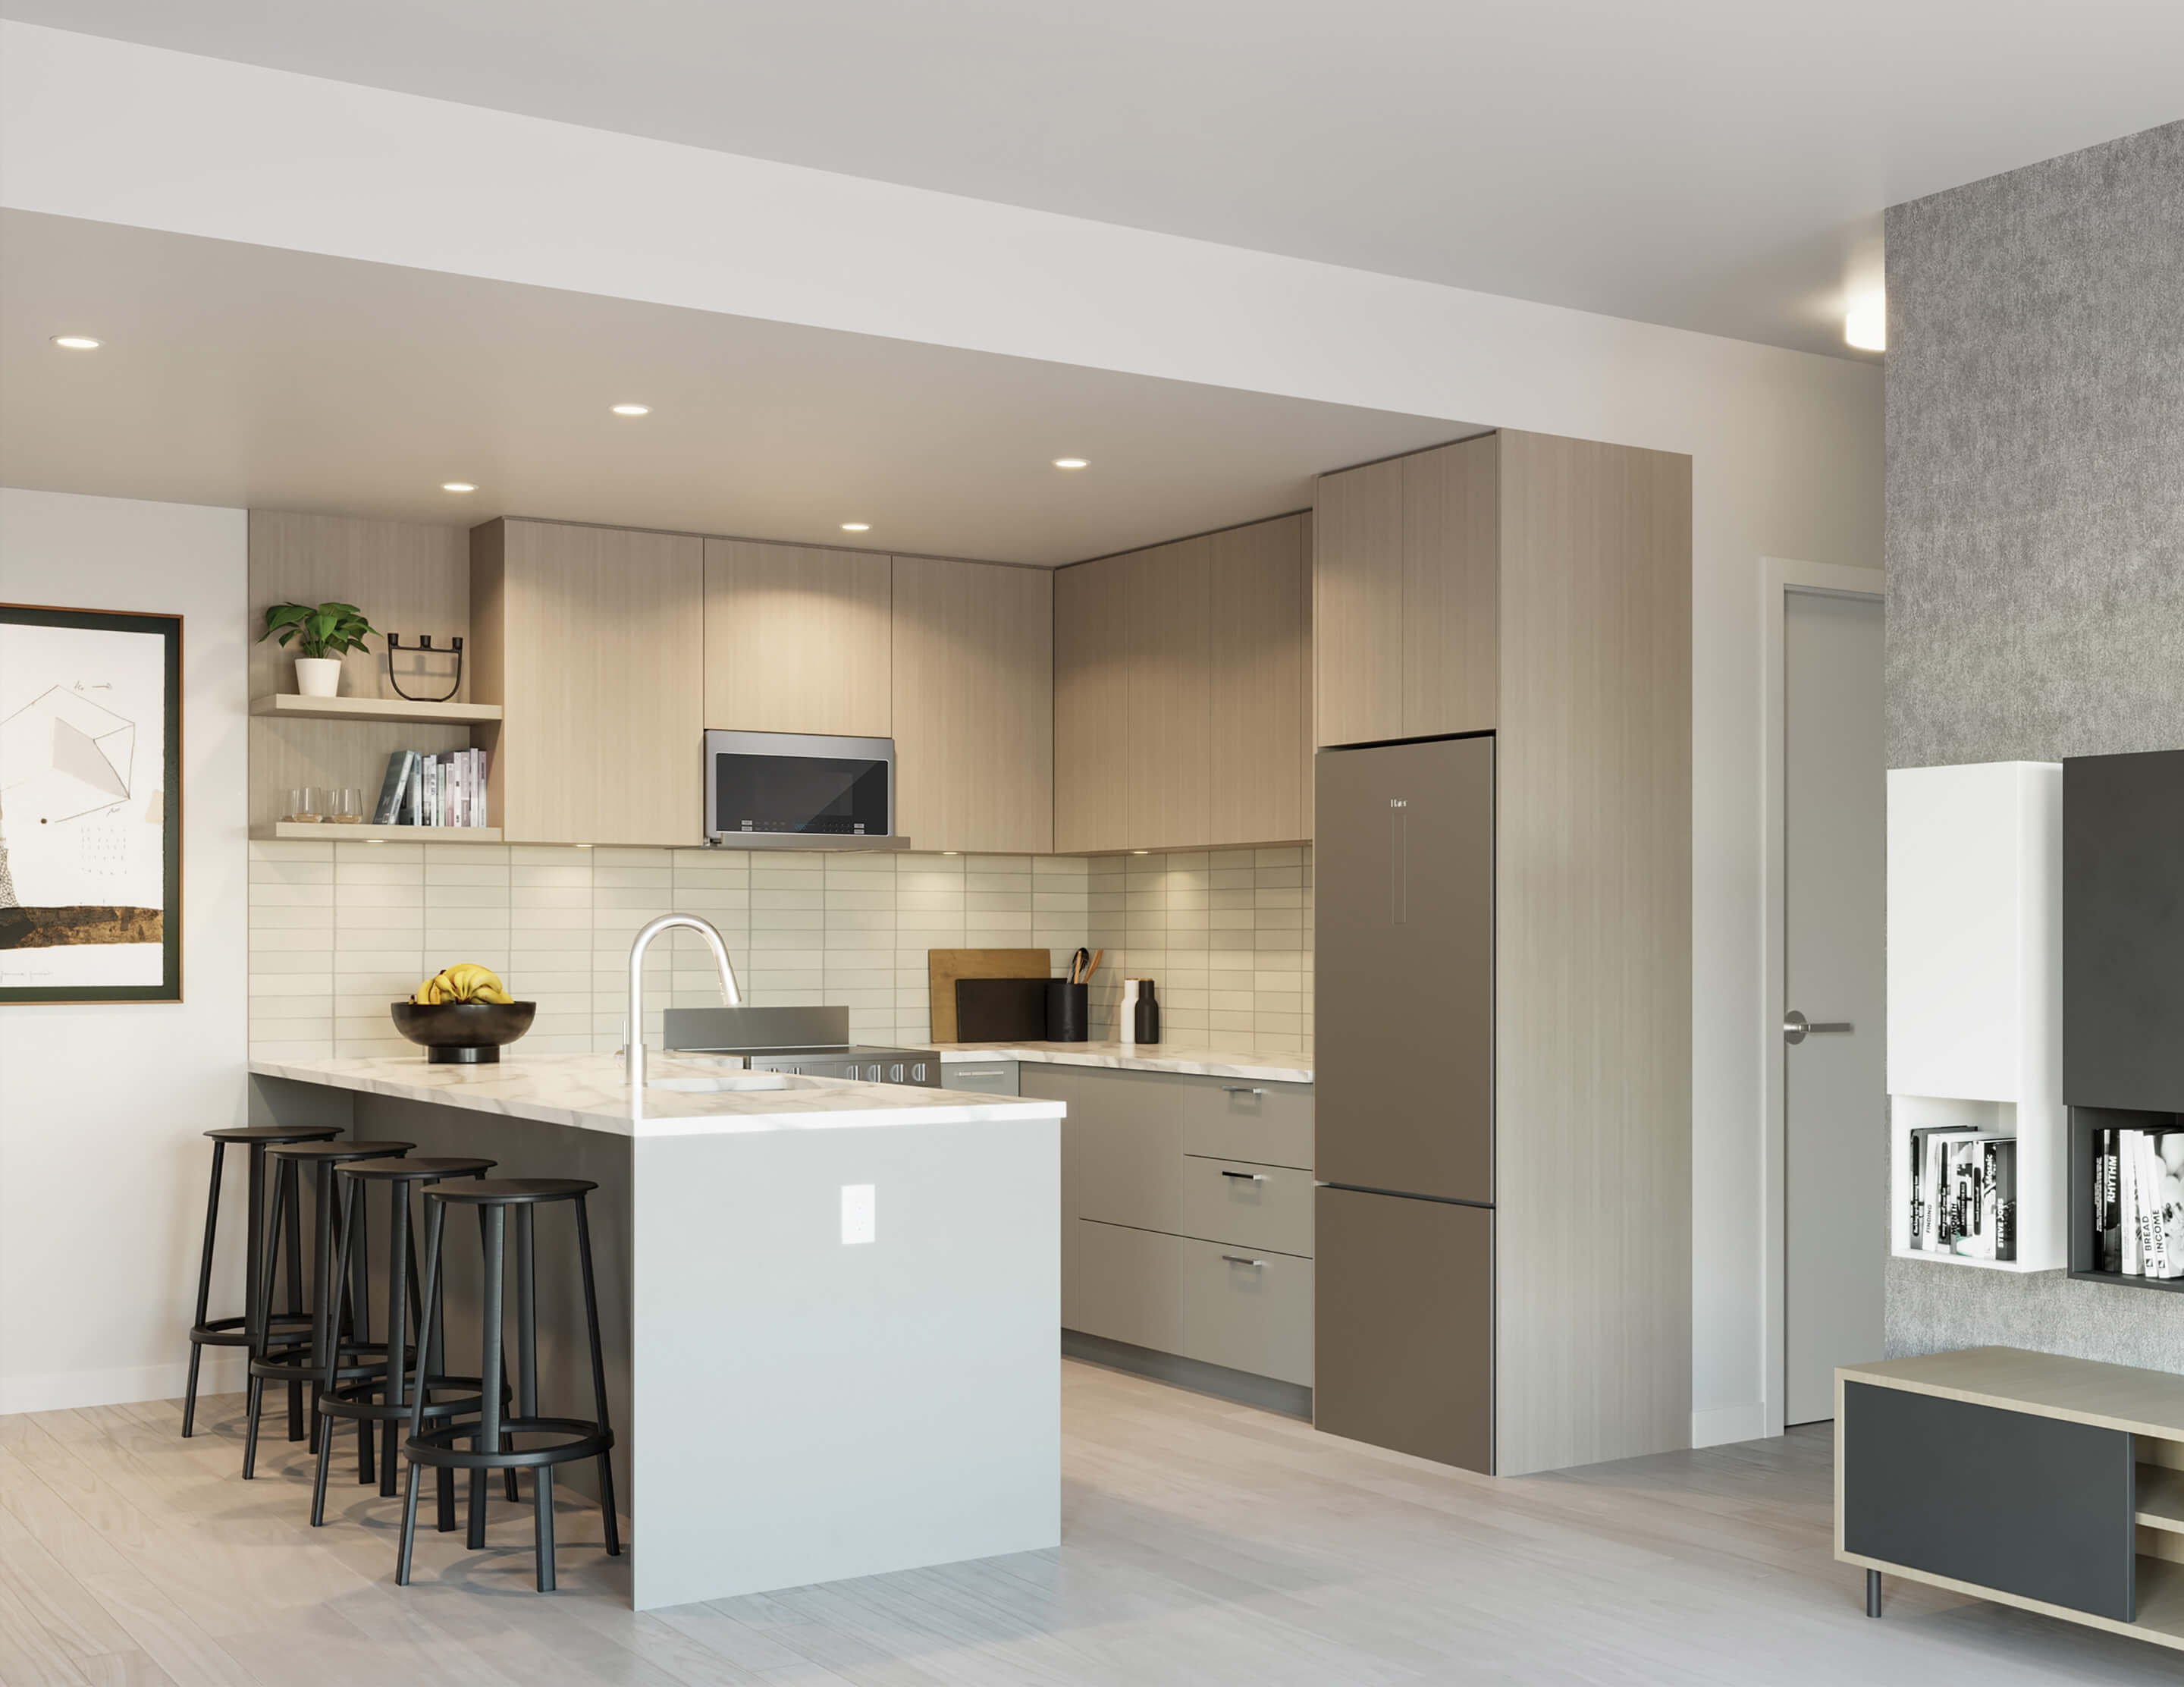 Q5 - 10777 138th St - Development by Tien Sher Group of Companies!